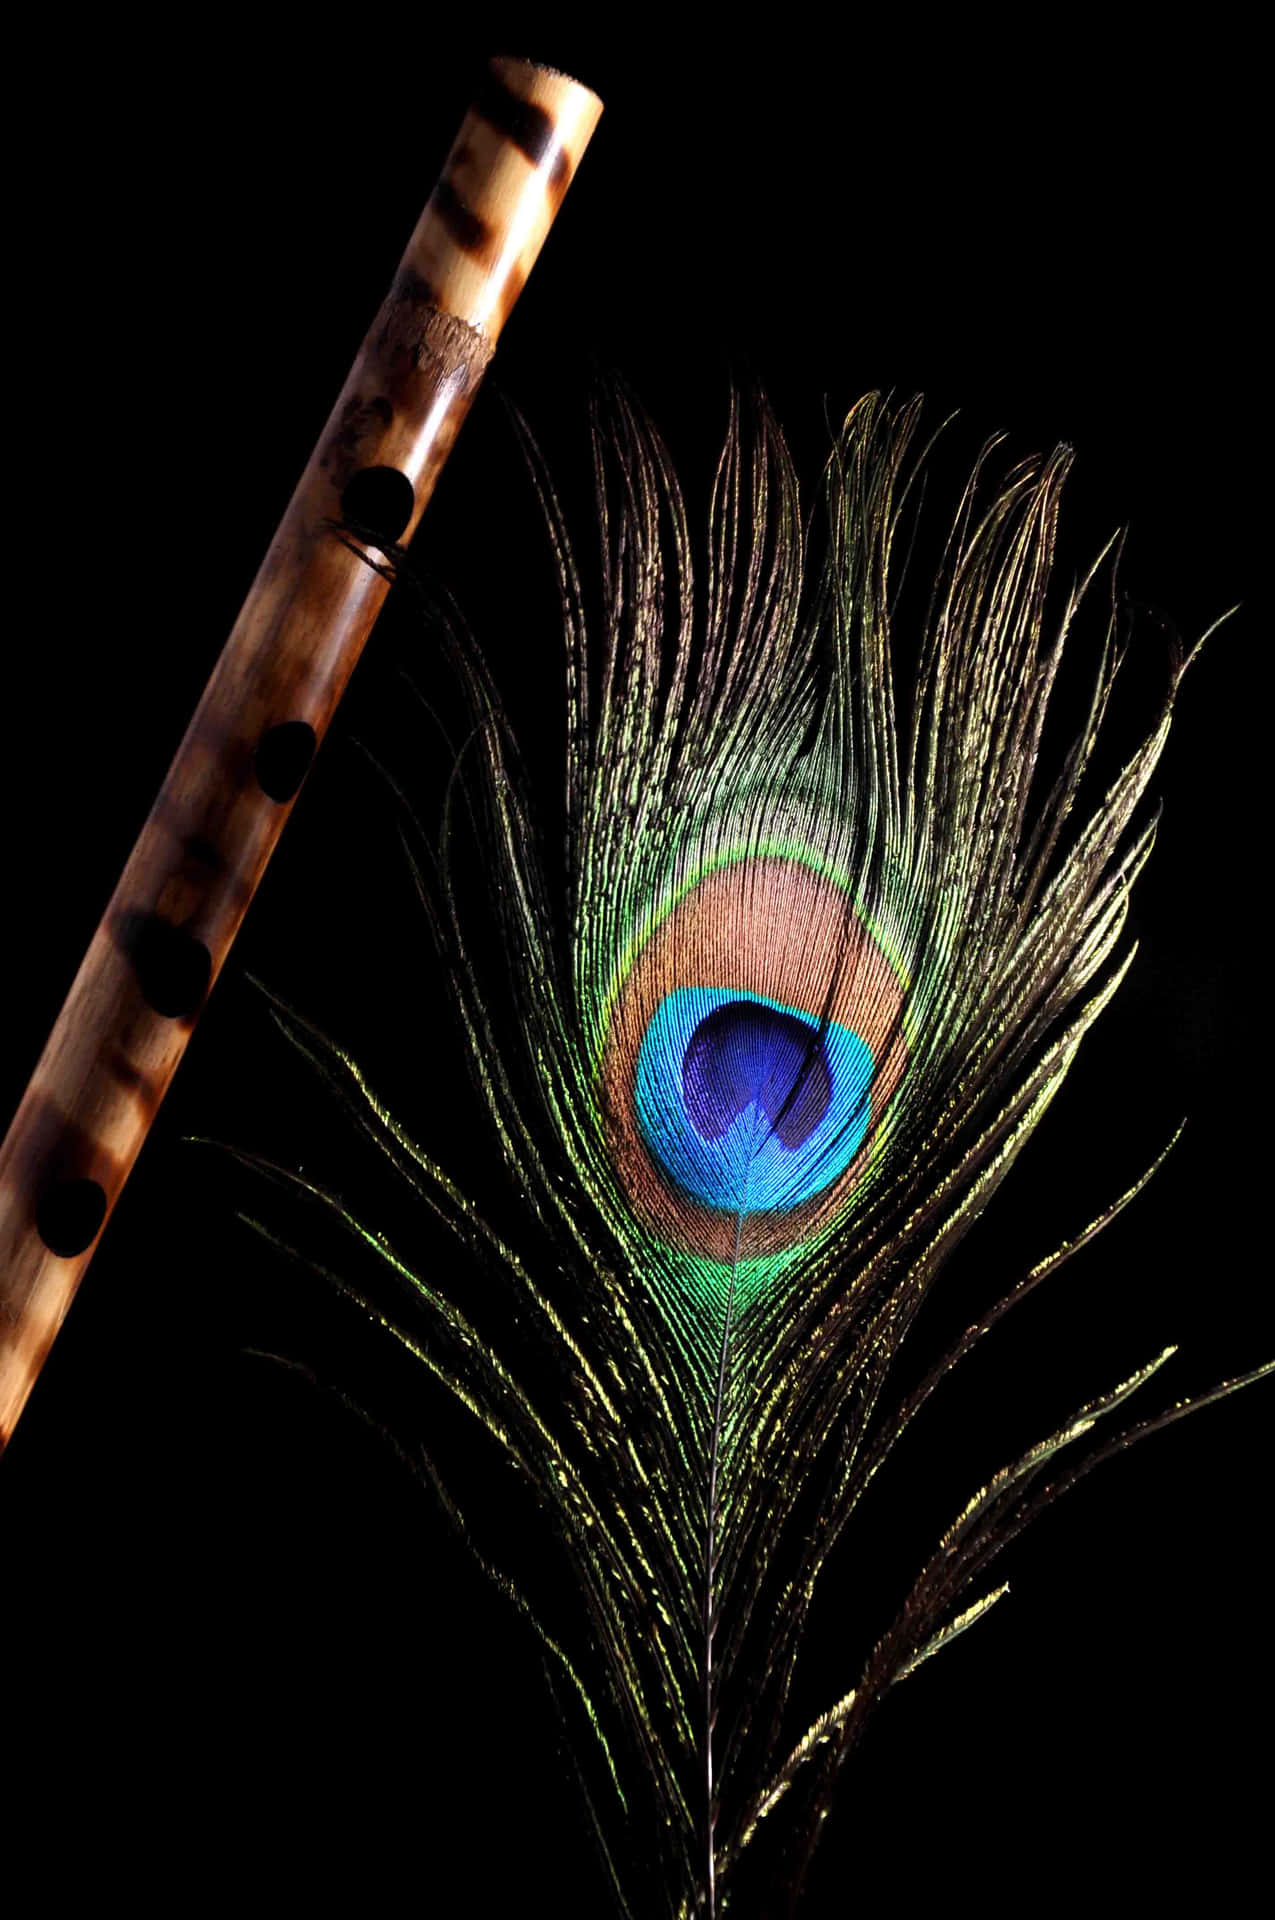 Image  An Eye-Catching Peacock Feather